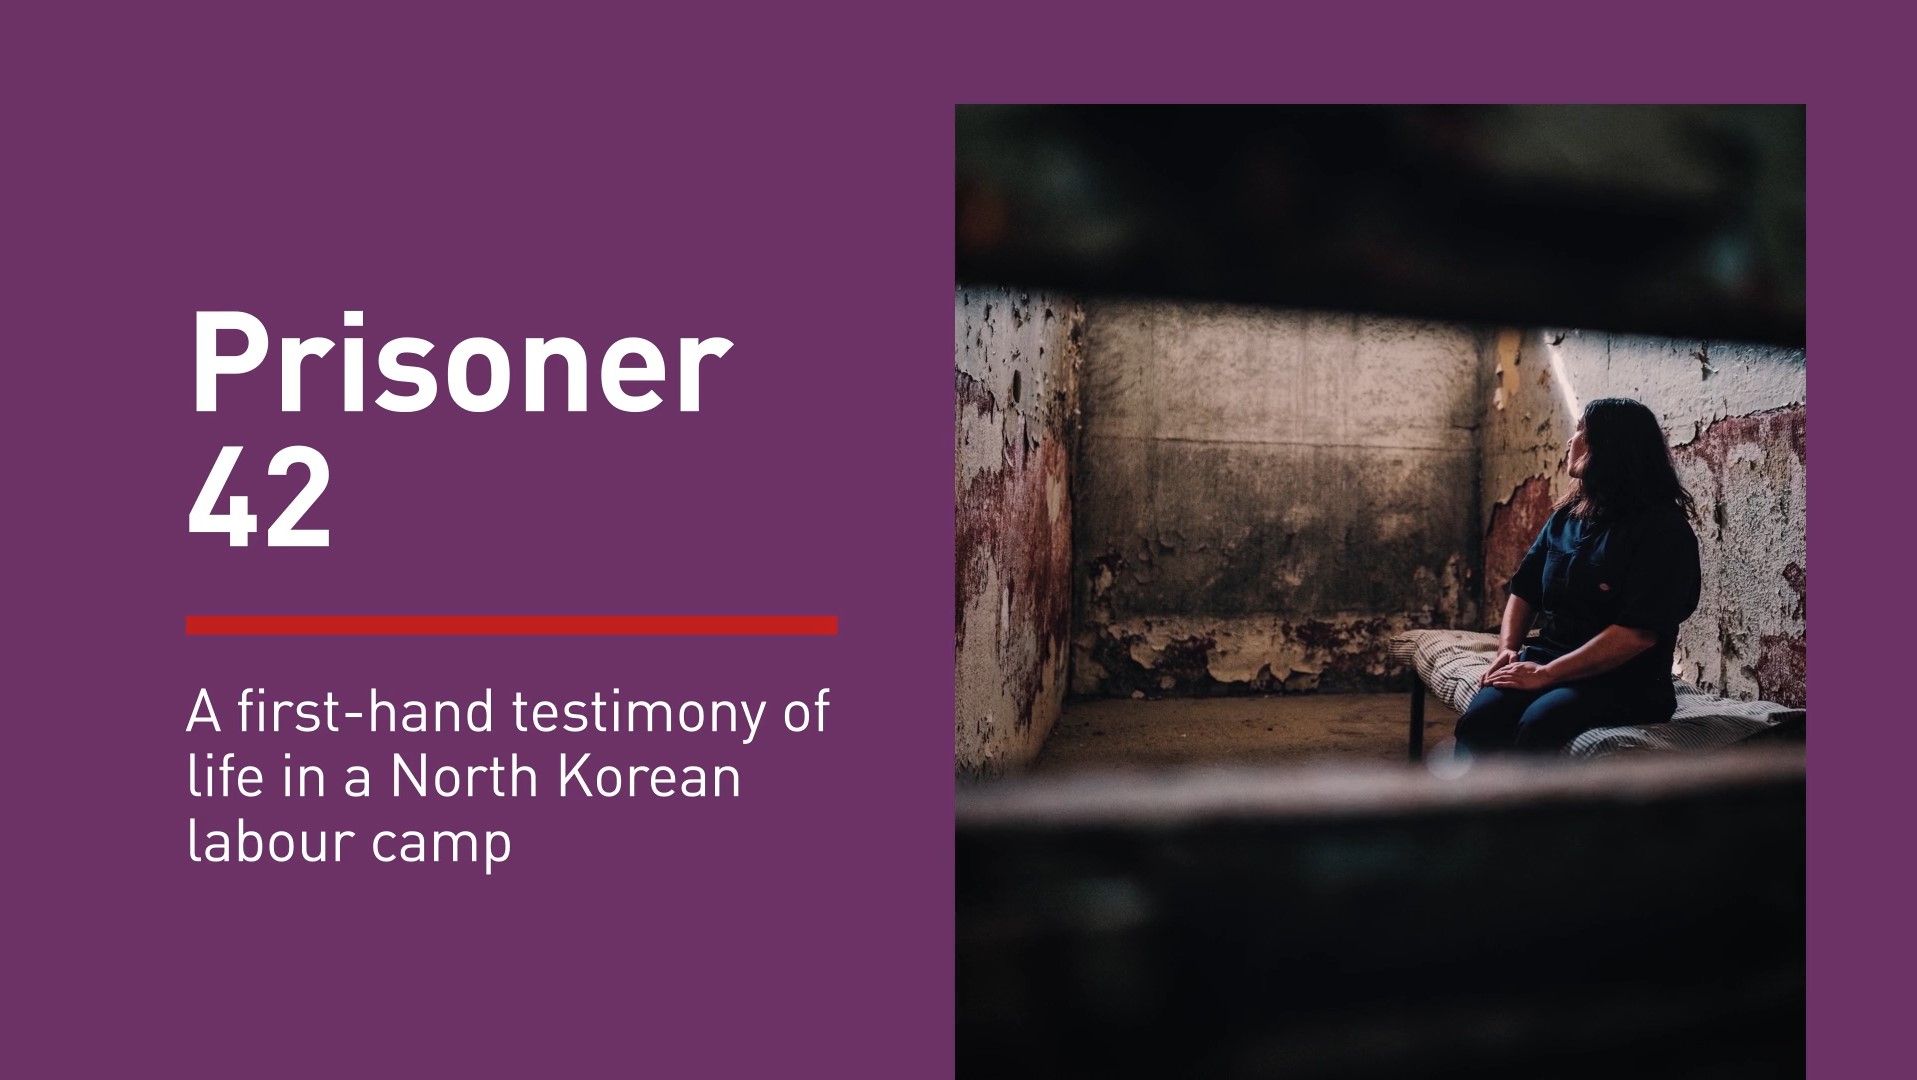 This story is based on a real-life account of a North Korea Christian sent to prison and then to a re-education camp, "Prisoner 42".